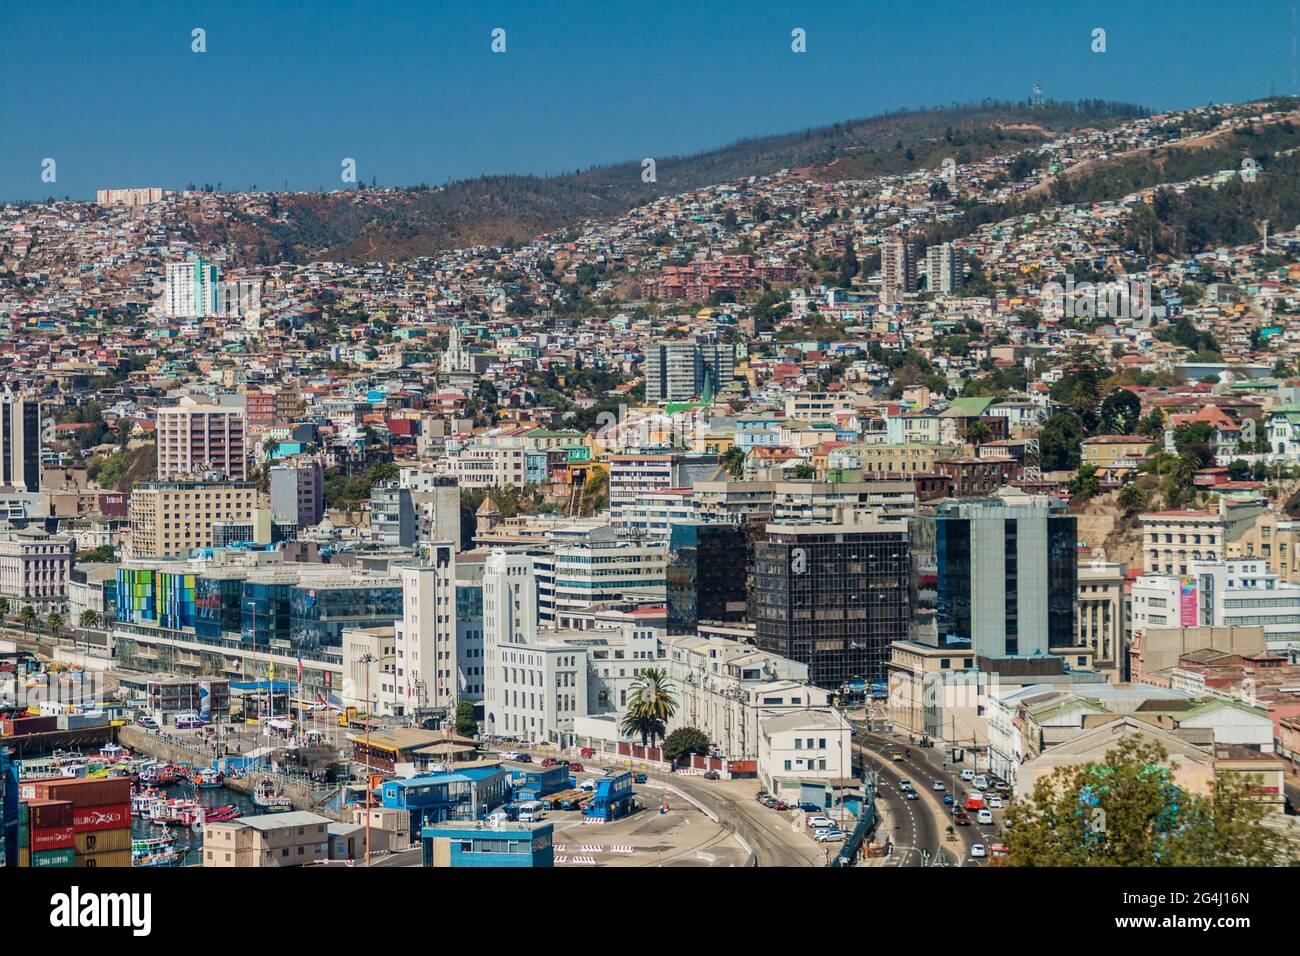 VALPARAISO, CHILE - MARCH 29, 2015: Colorful houses on hills of Valparaiso, Chile Stock Photo